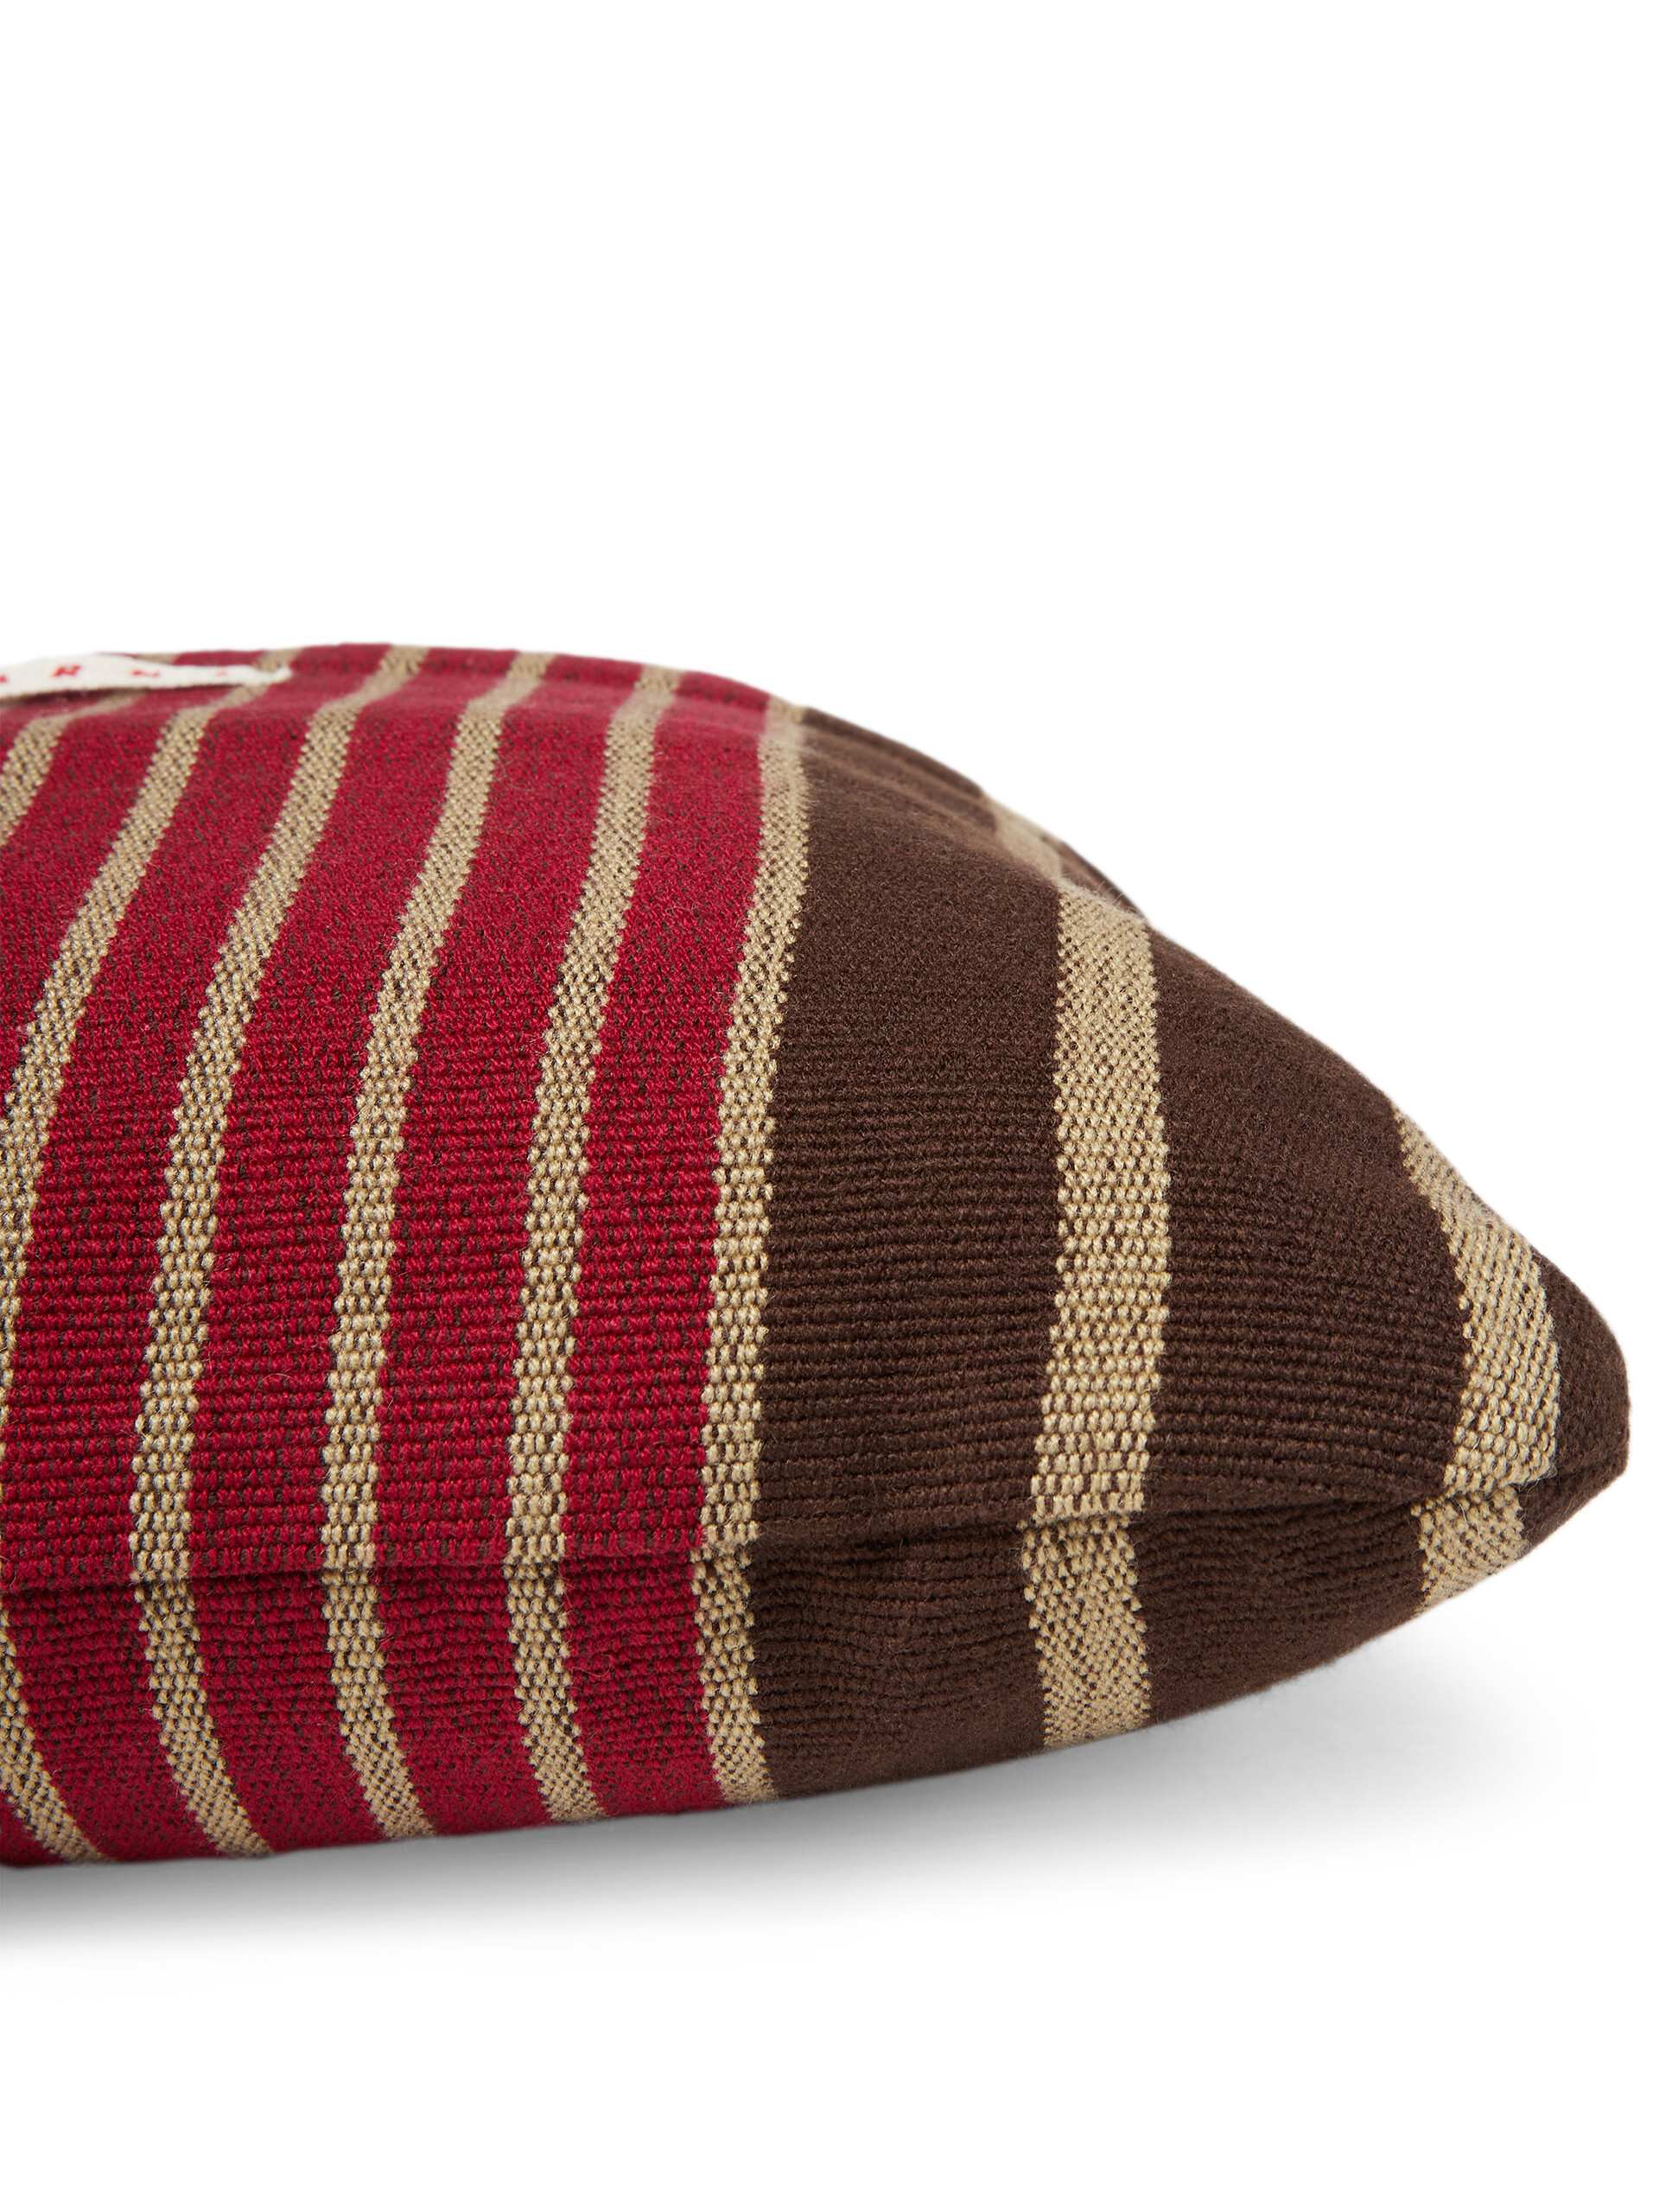 MARNI MARKET square pillow cover in polyester with red brown and beige vertical stripes - Furniture - Image 3